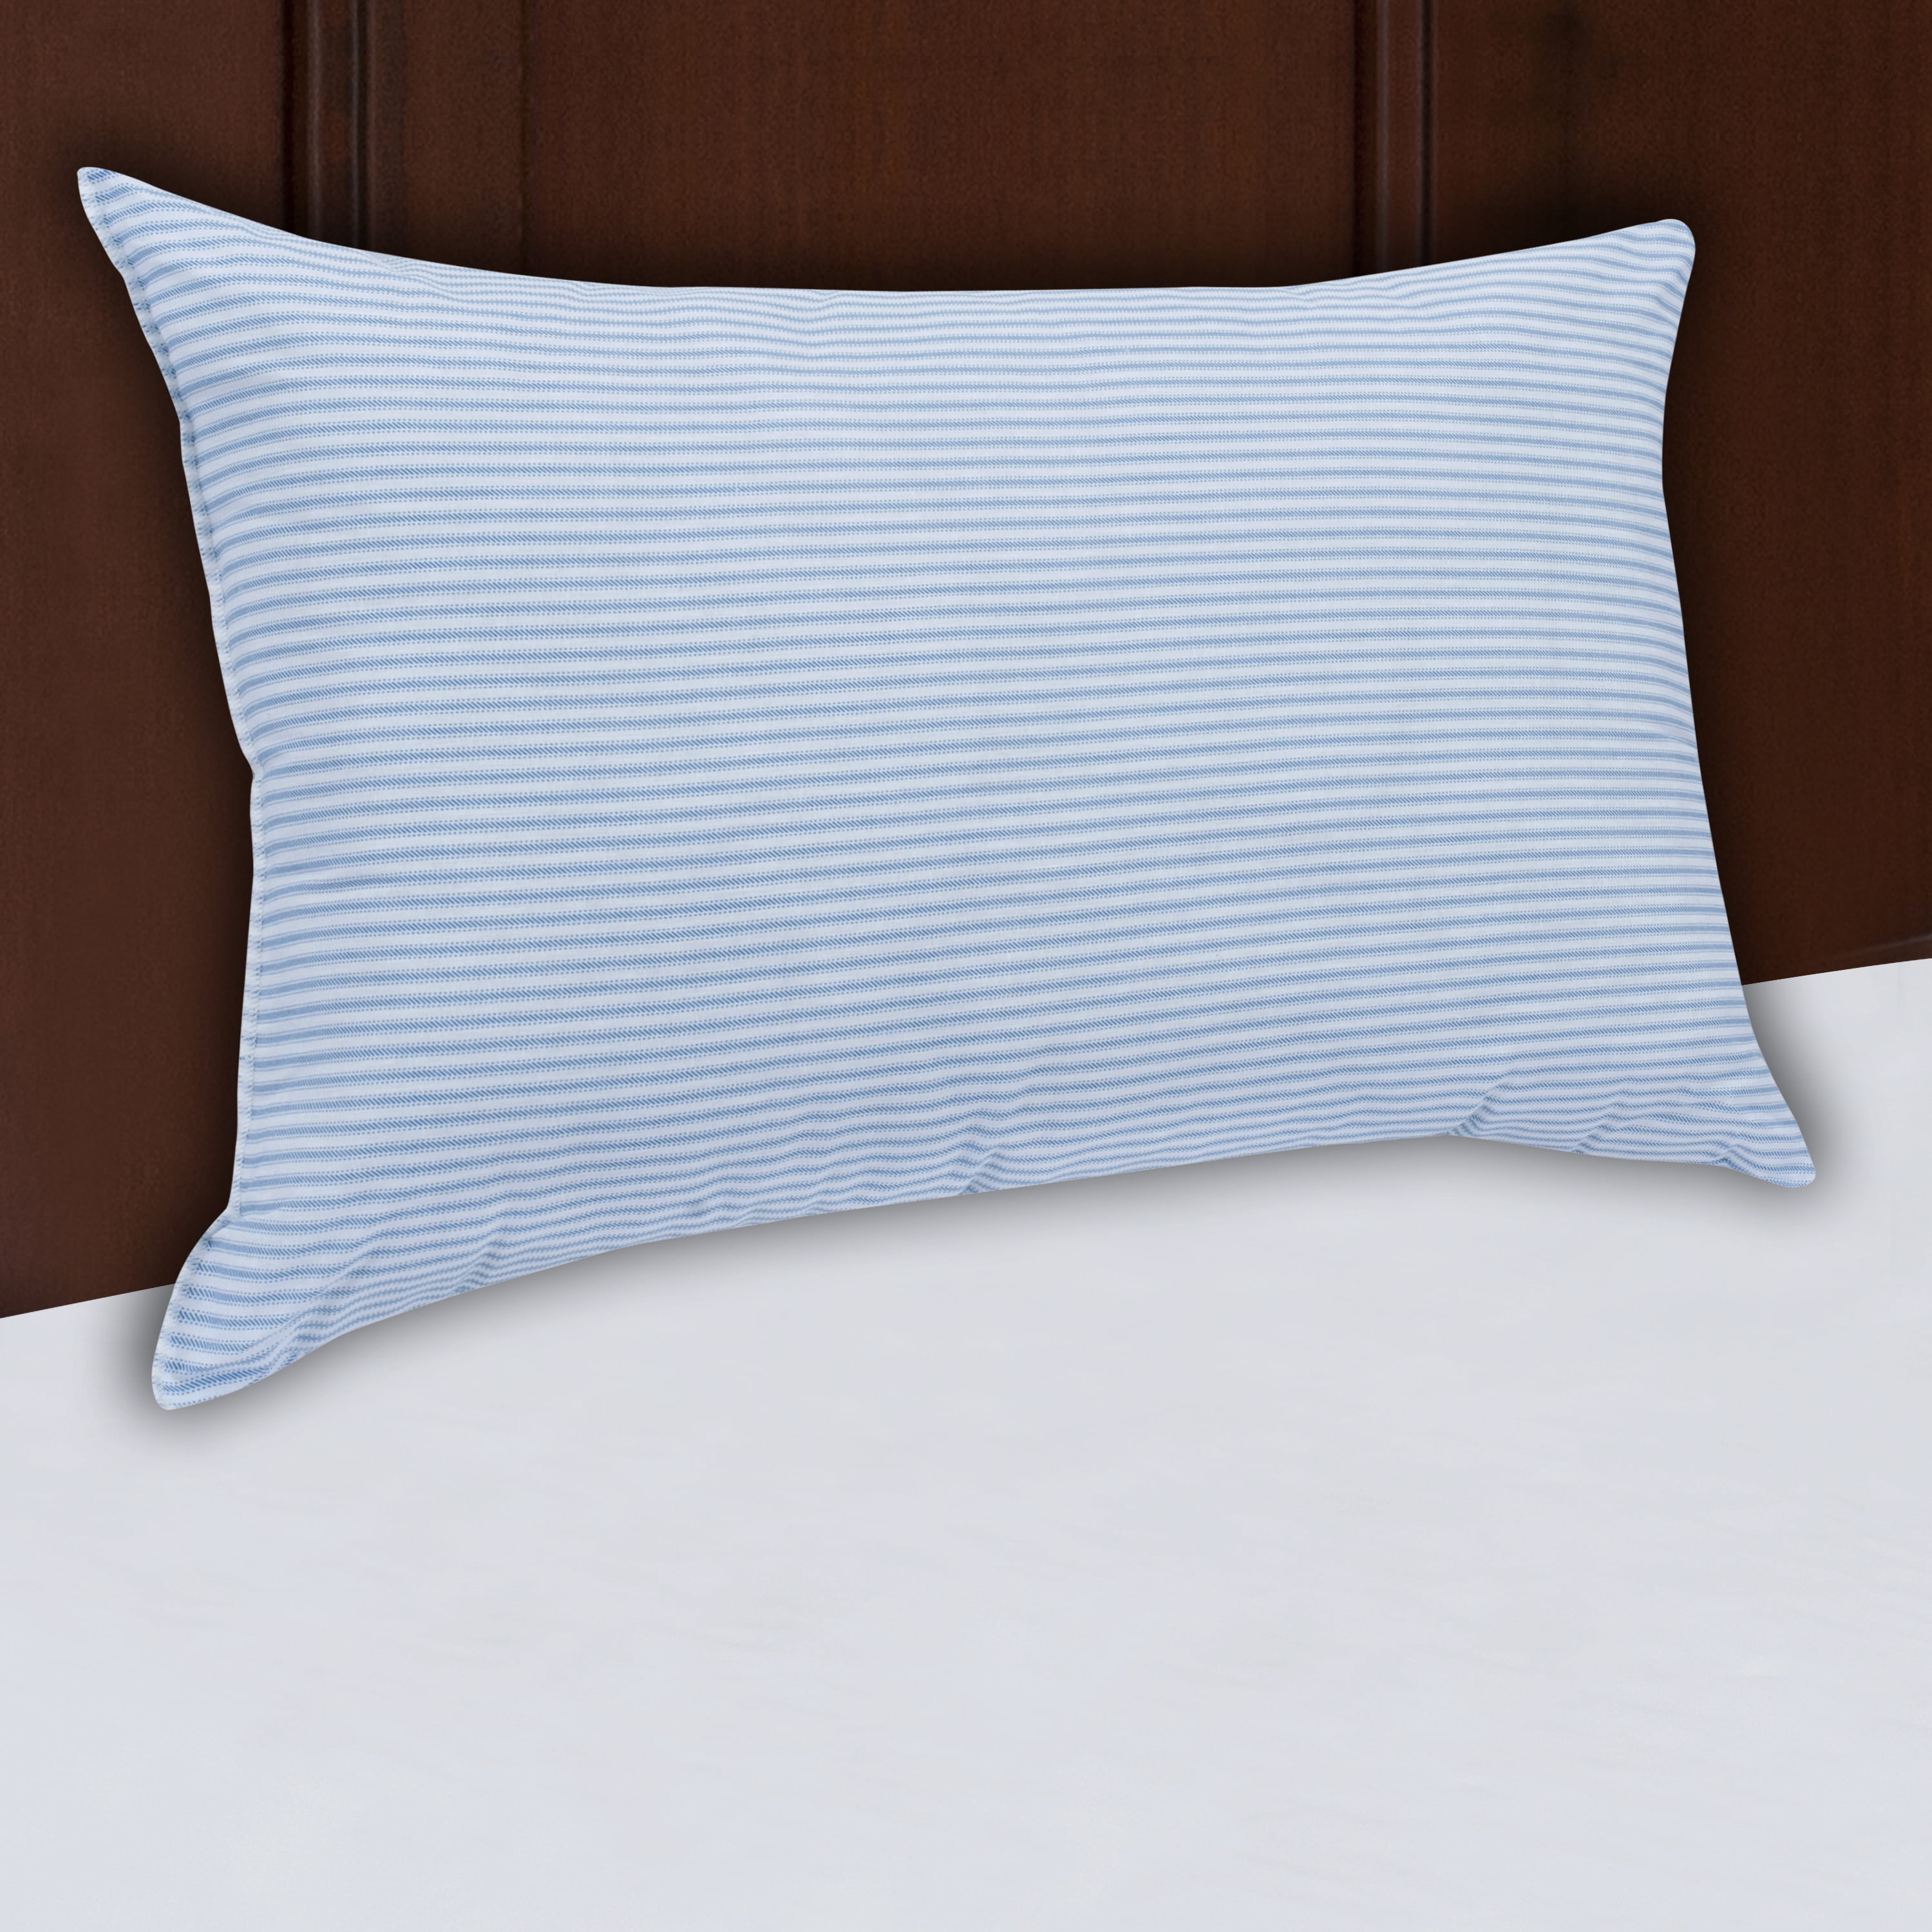 Mainstays HUGE Pillow 20" x 28" in Blue and White Stripe Set of 2 